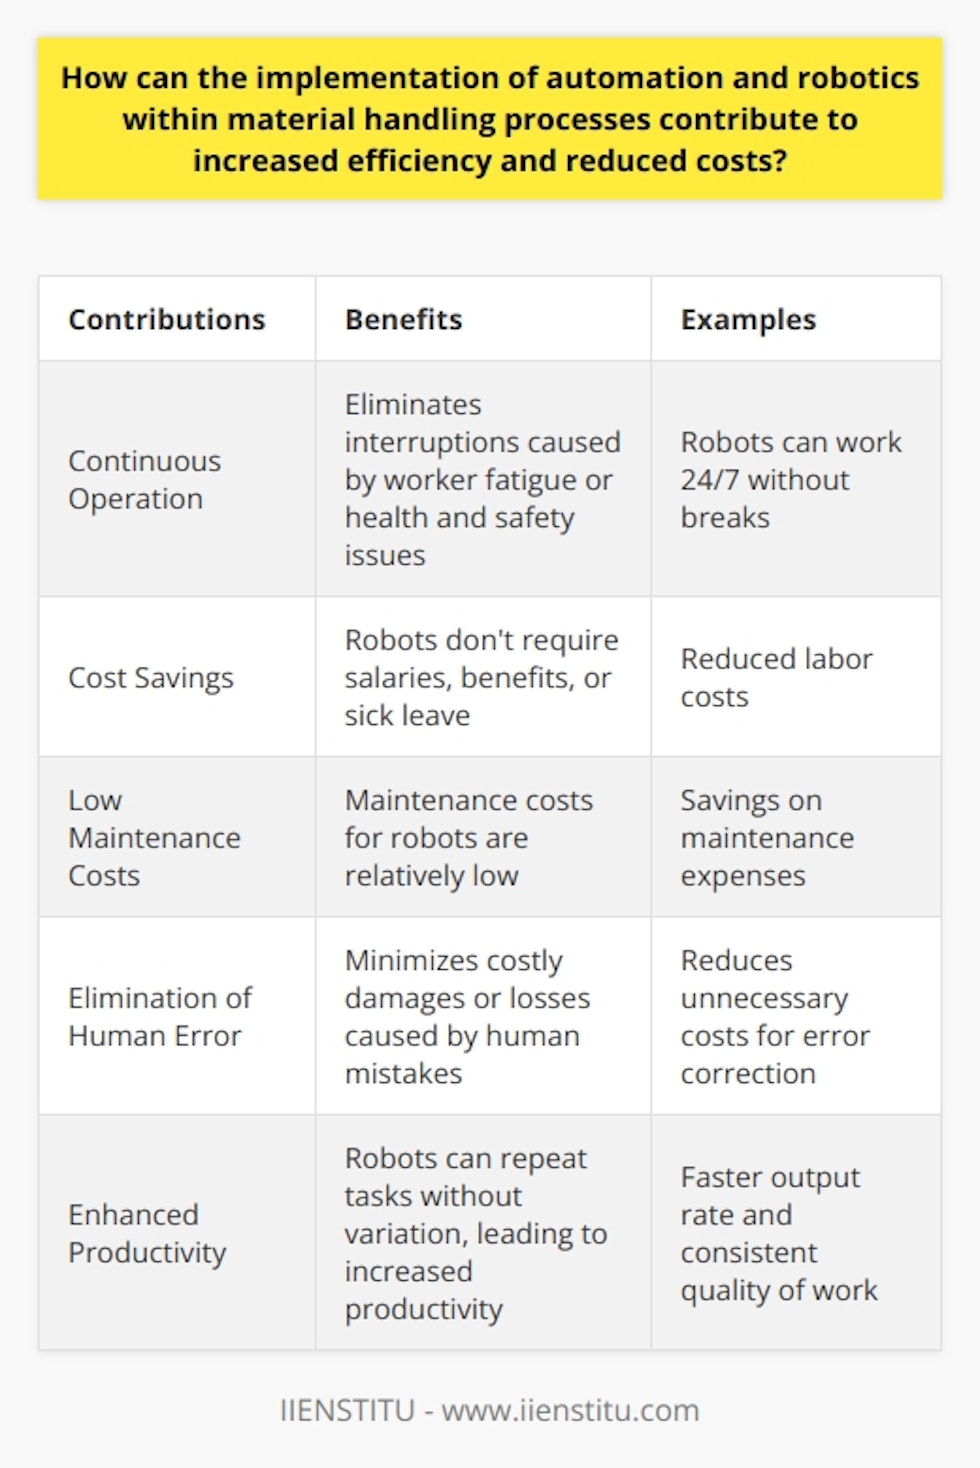 The integration of automation and robotics within material handling processes greatly improves efficiency by allowing robots to operate continuously without fatigue or breaks. This eliminates the risk of interruptions caused by worker fatigue or health and safety issues. Additionally, integrating robotics into material handling operations can result in significant cost savings. Robots do not require salaries, benefits, or sick leave, and their maintenance costs are relatively low. These cost savings can be reinvested to expand and improve the business.Another advantage of automation is the elimination of human error. Mistakes made by humans can lead to costly damages or losses, so minimizing these errors not only improves overall output but also reduces unnecessary costs associated with error correction.Automation and robotics also contribute to enhanced productivity and consistency. Robots can easily repeat the same task without variation, ensuring a consistent quality of work. This repetitive precision allows for increased productivity and reproducibility, leading to cost reduction. Additionally, machines are generally faster than human workers, resulting in a higher output rate.In conclusion, implementing automation and robotics in material handling processes can lead to increased efficiency and reduced costs. The continuous operation of robots, absence of human-related costs, elimination of human errors, and consistent production quality all contribute to these benefits. Therefore, businesses should consider integrating more technology into their operations to achieve these advantages.